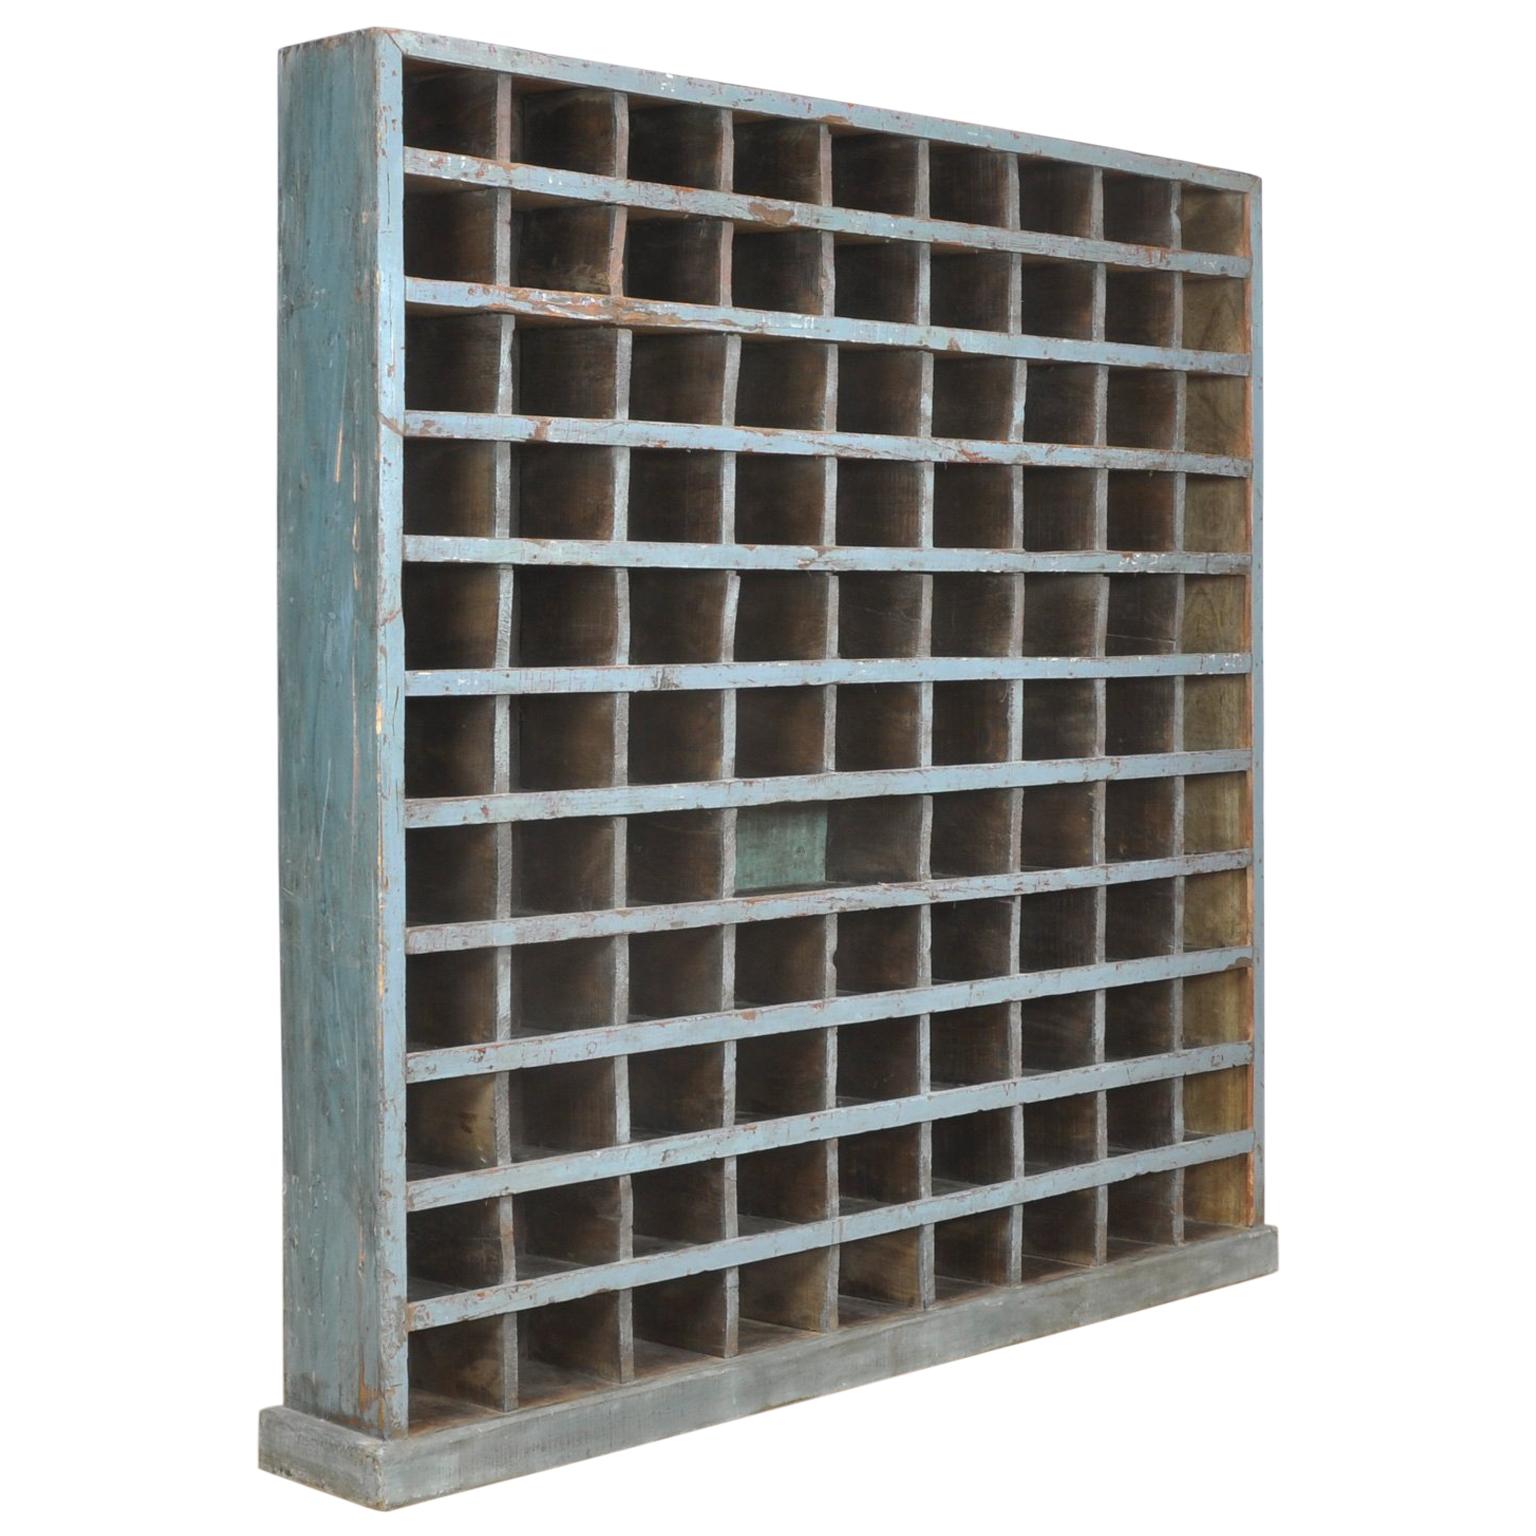 Vintage Style Industrial Pigeon Hole Wall Unit Metal Storage Shelf 9 Cubicles Rustic Cabinet 4 Cubicles 